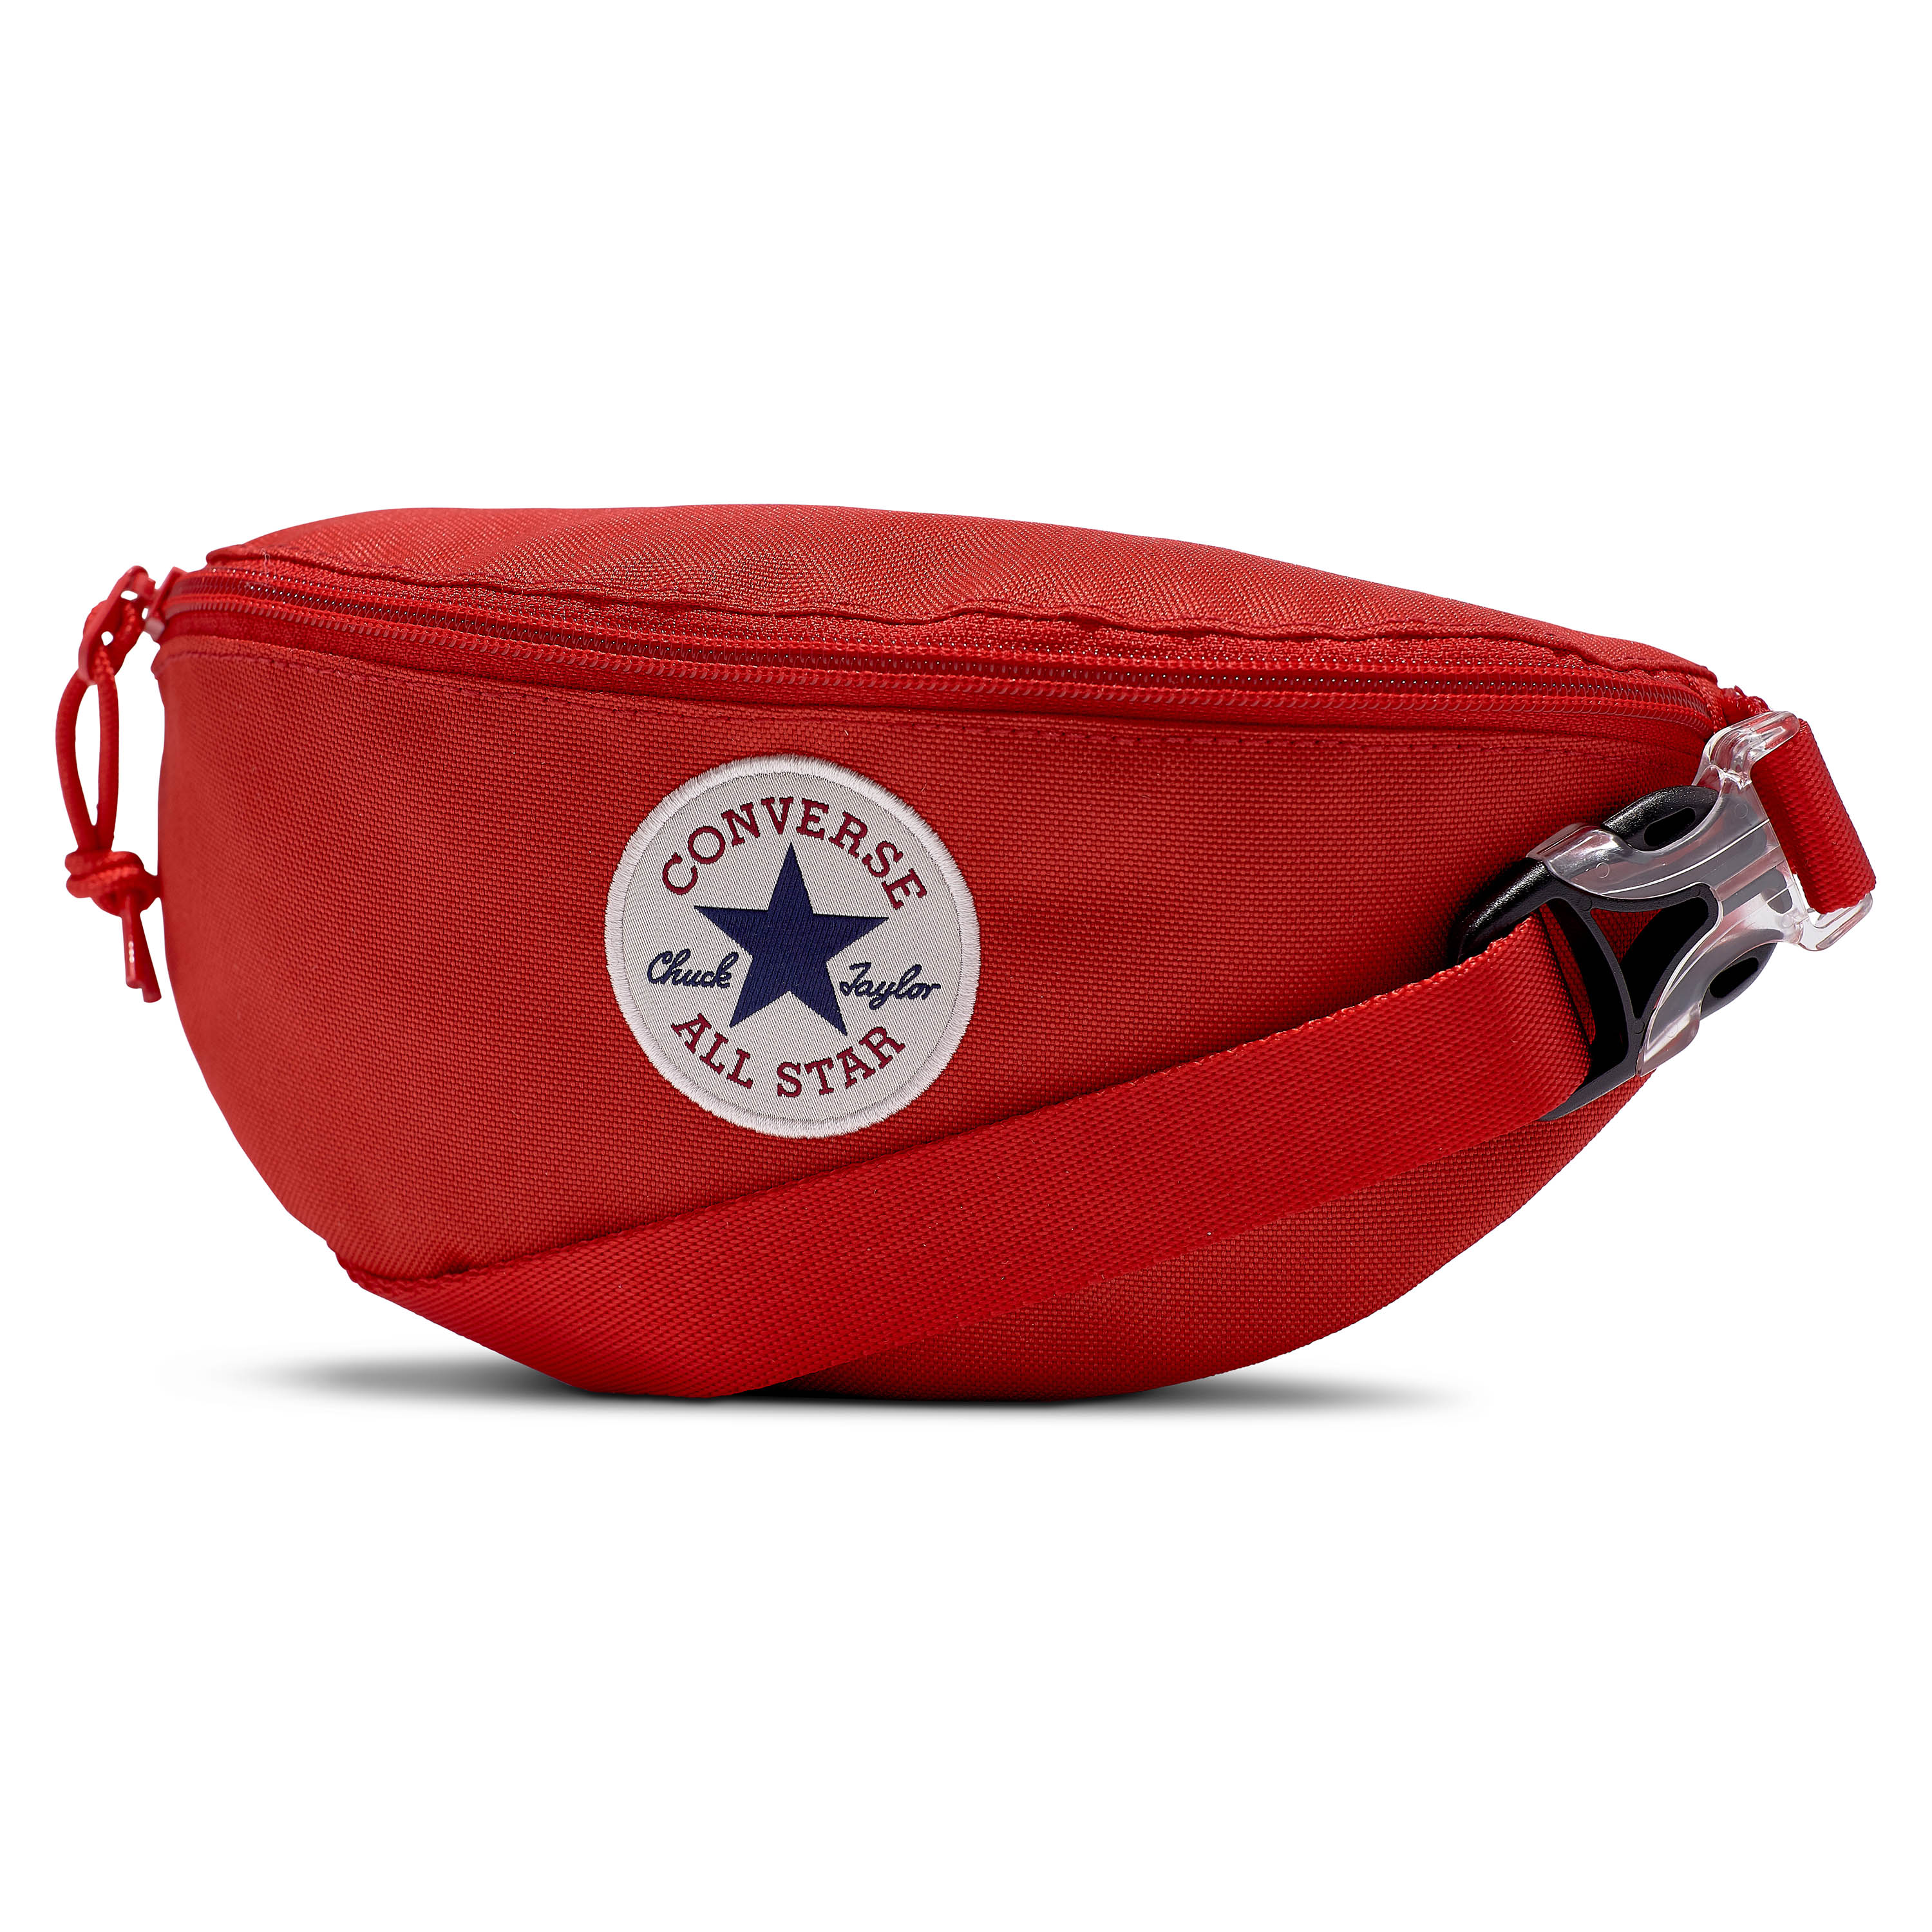 CONVERSE Sling Pack 10019907-A06